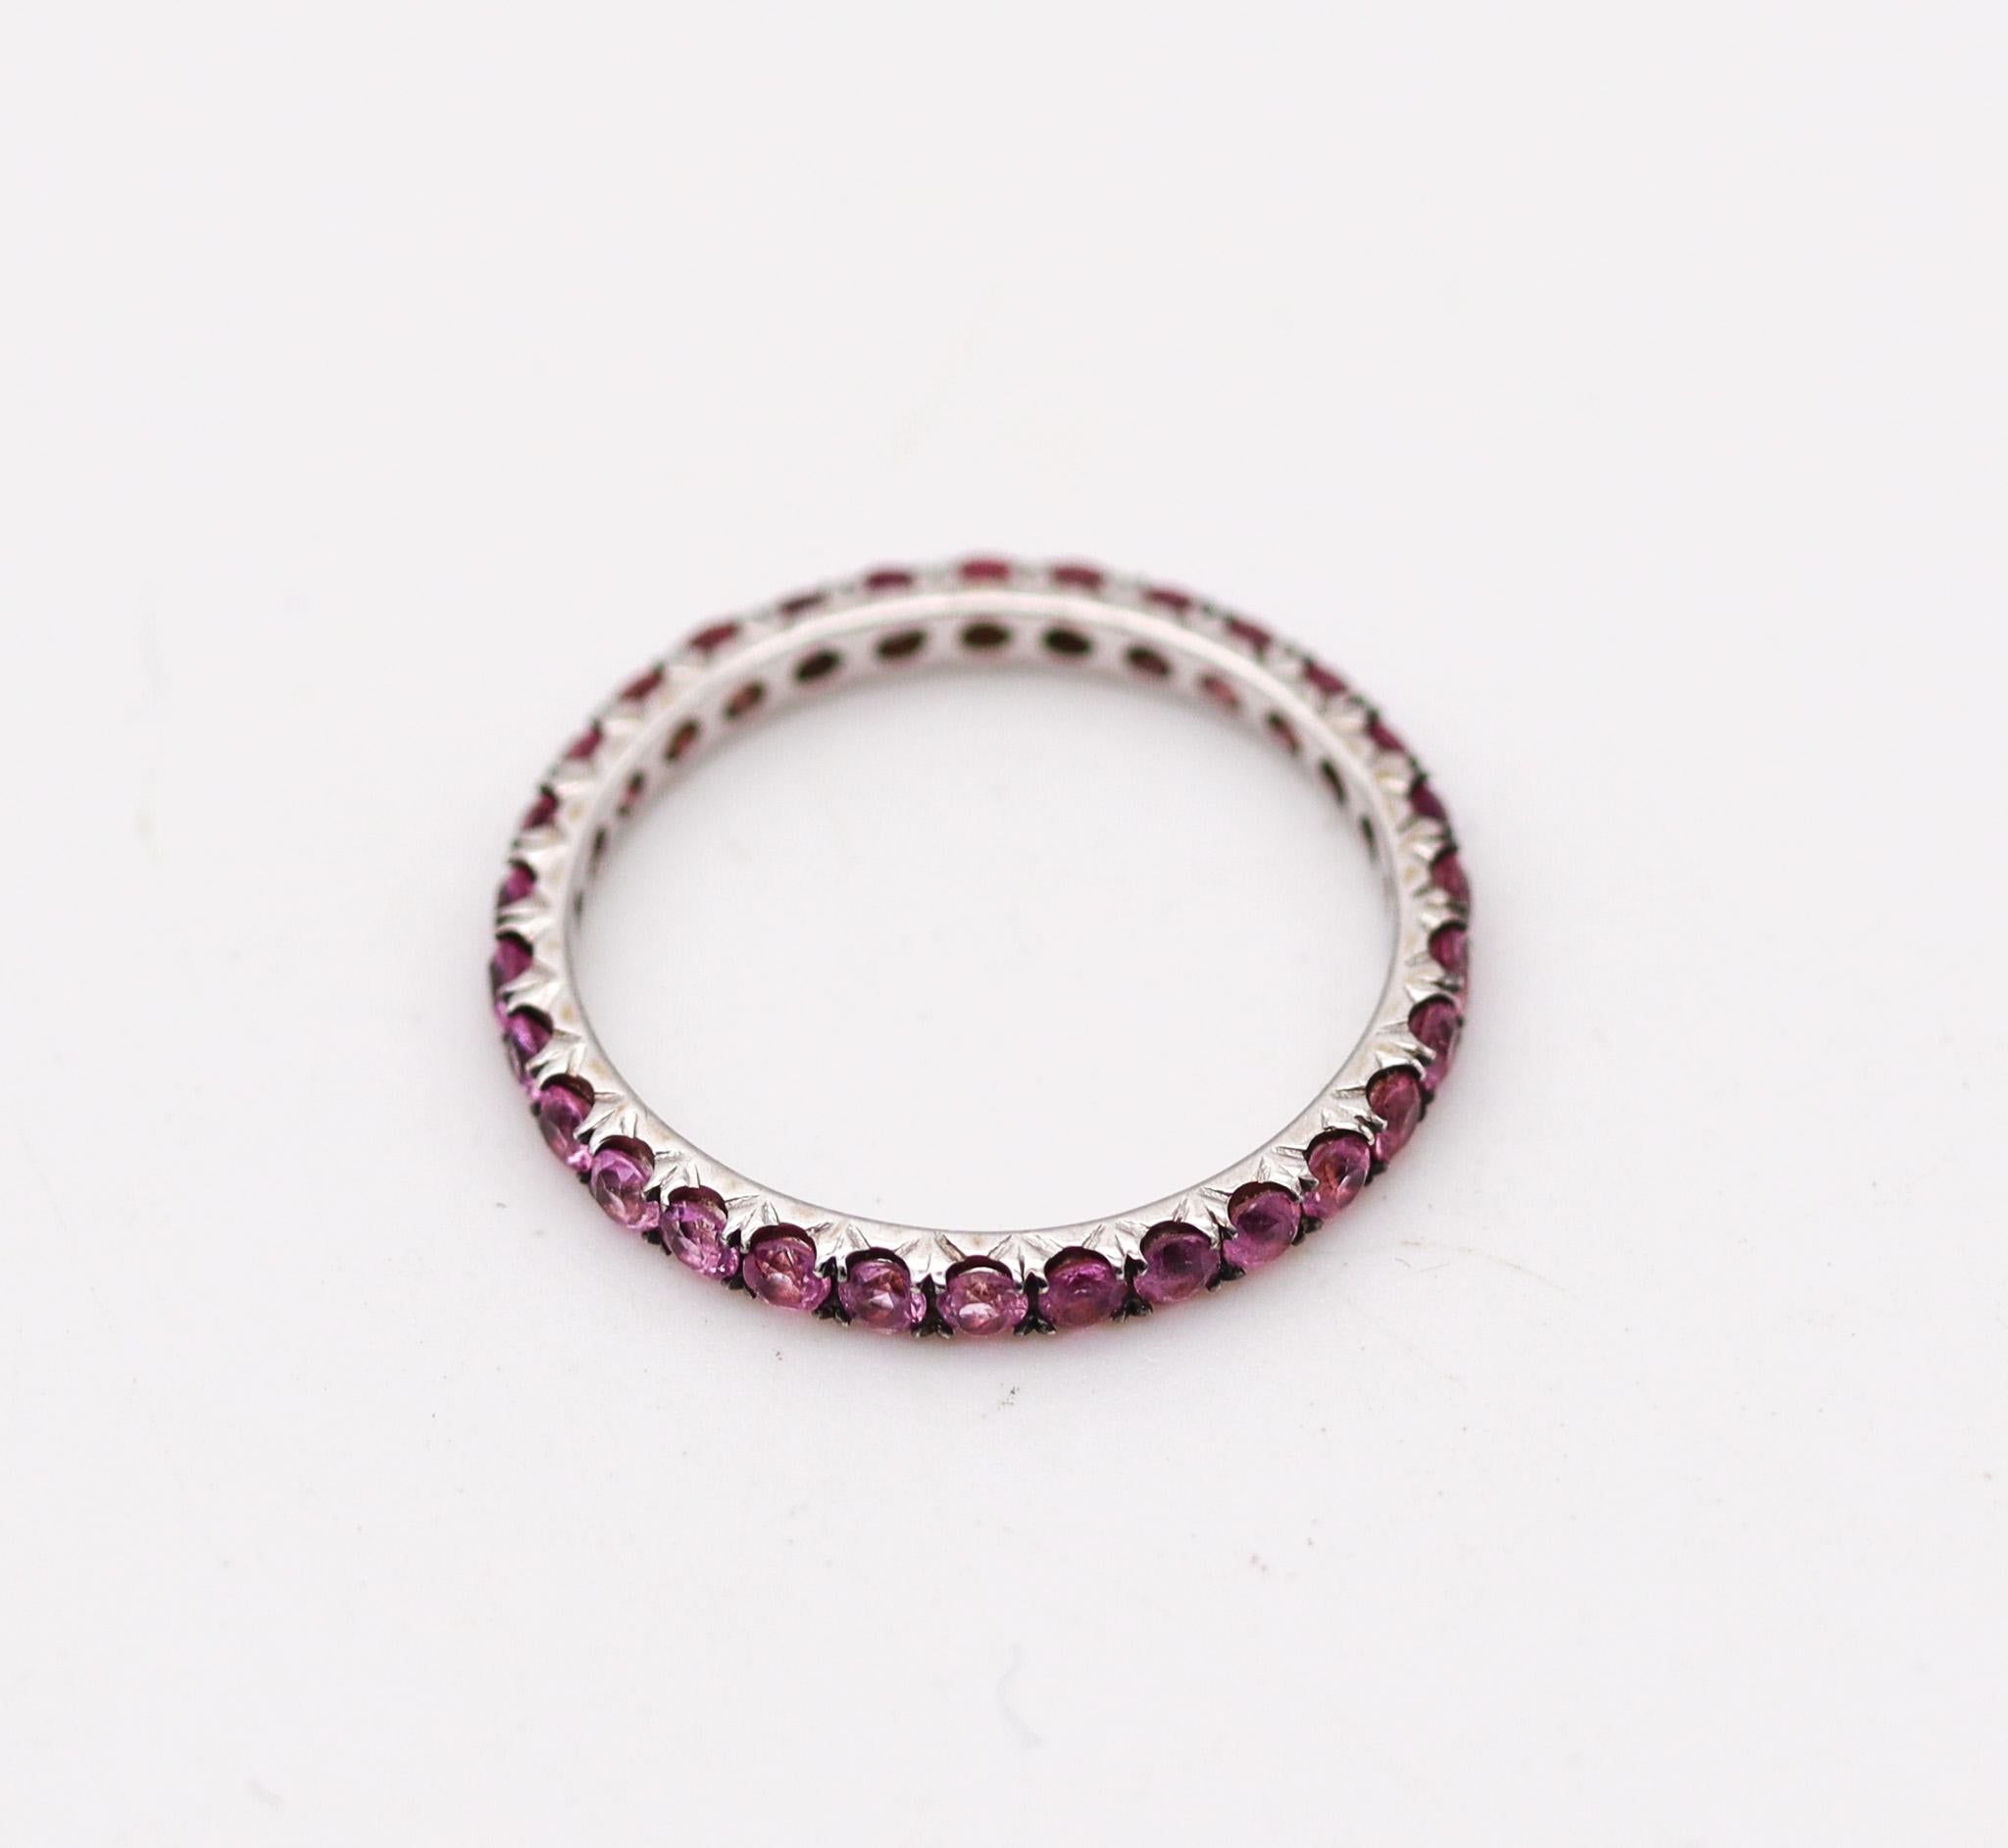 Modernist Italian Eternity Ring Band In 18 Kt White Gold With 1.20 Ctw In Pink Sapphires For Sale